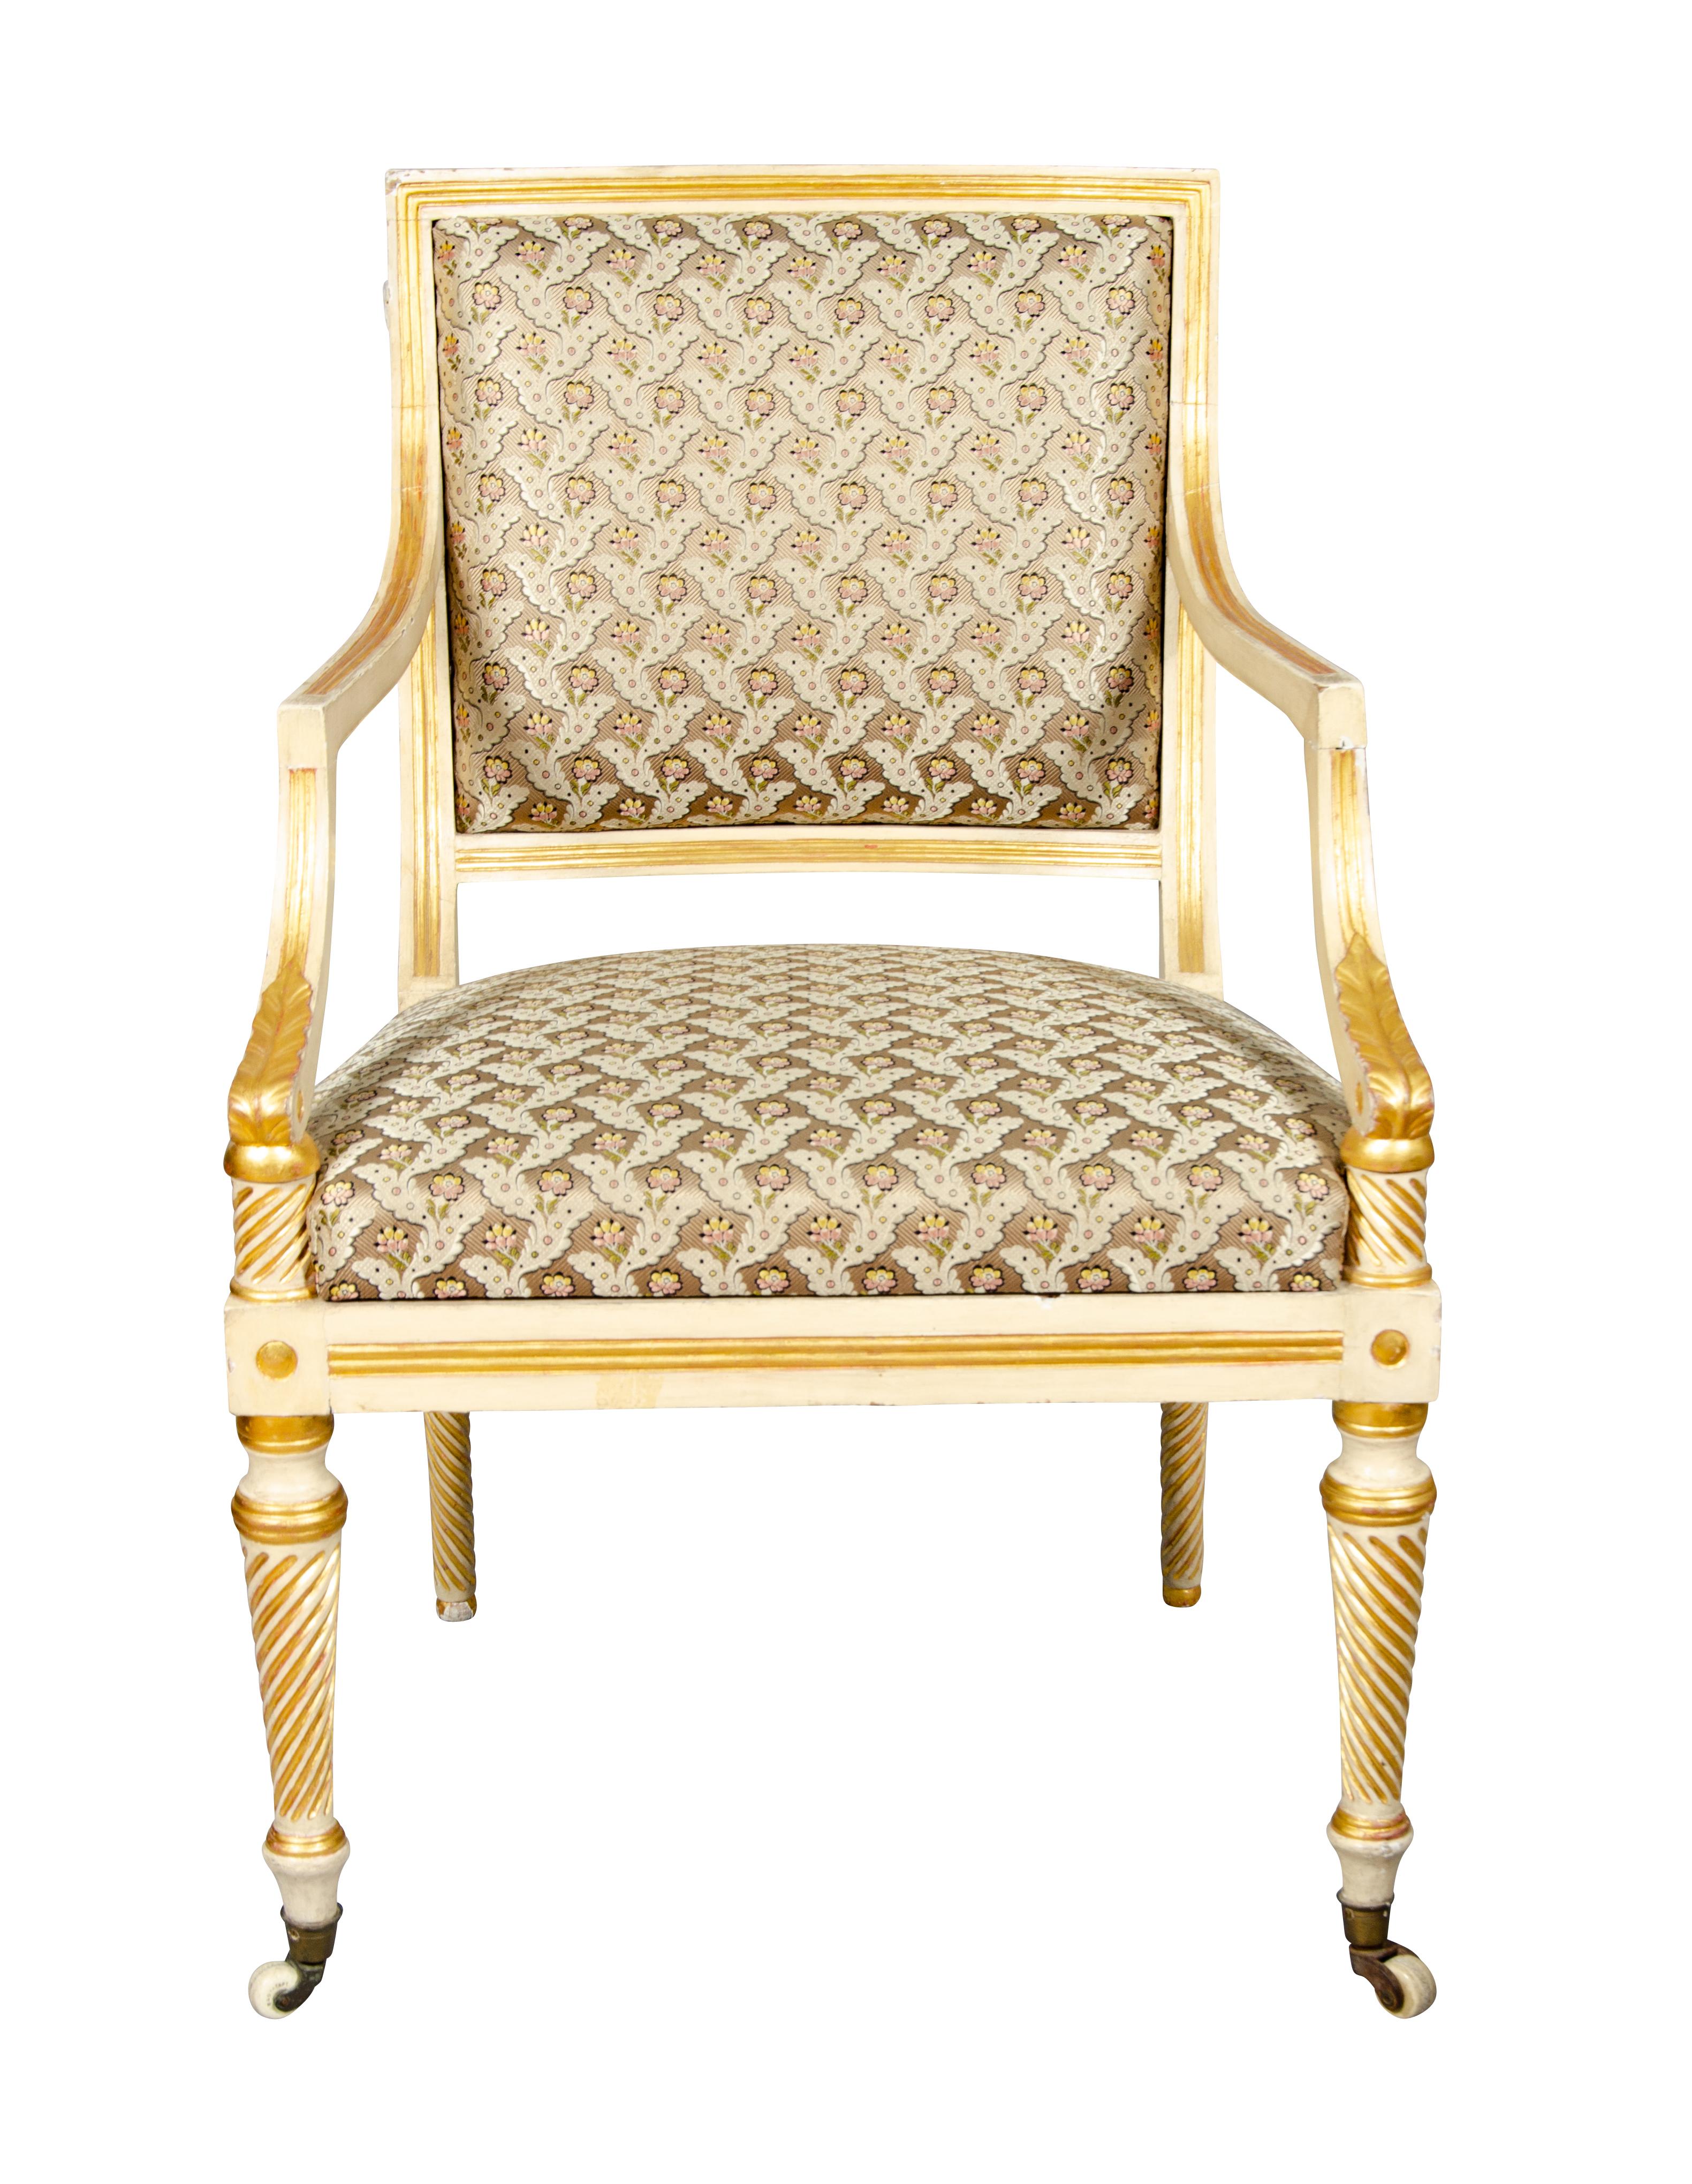 Pair of Regency Painted and Gilded Armchairs In Good Condition For Sale In Essex, MA